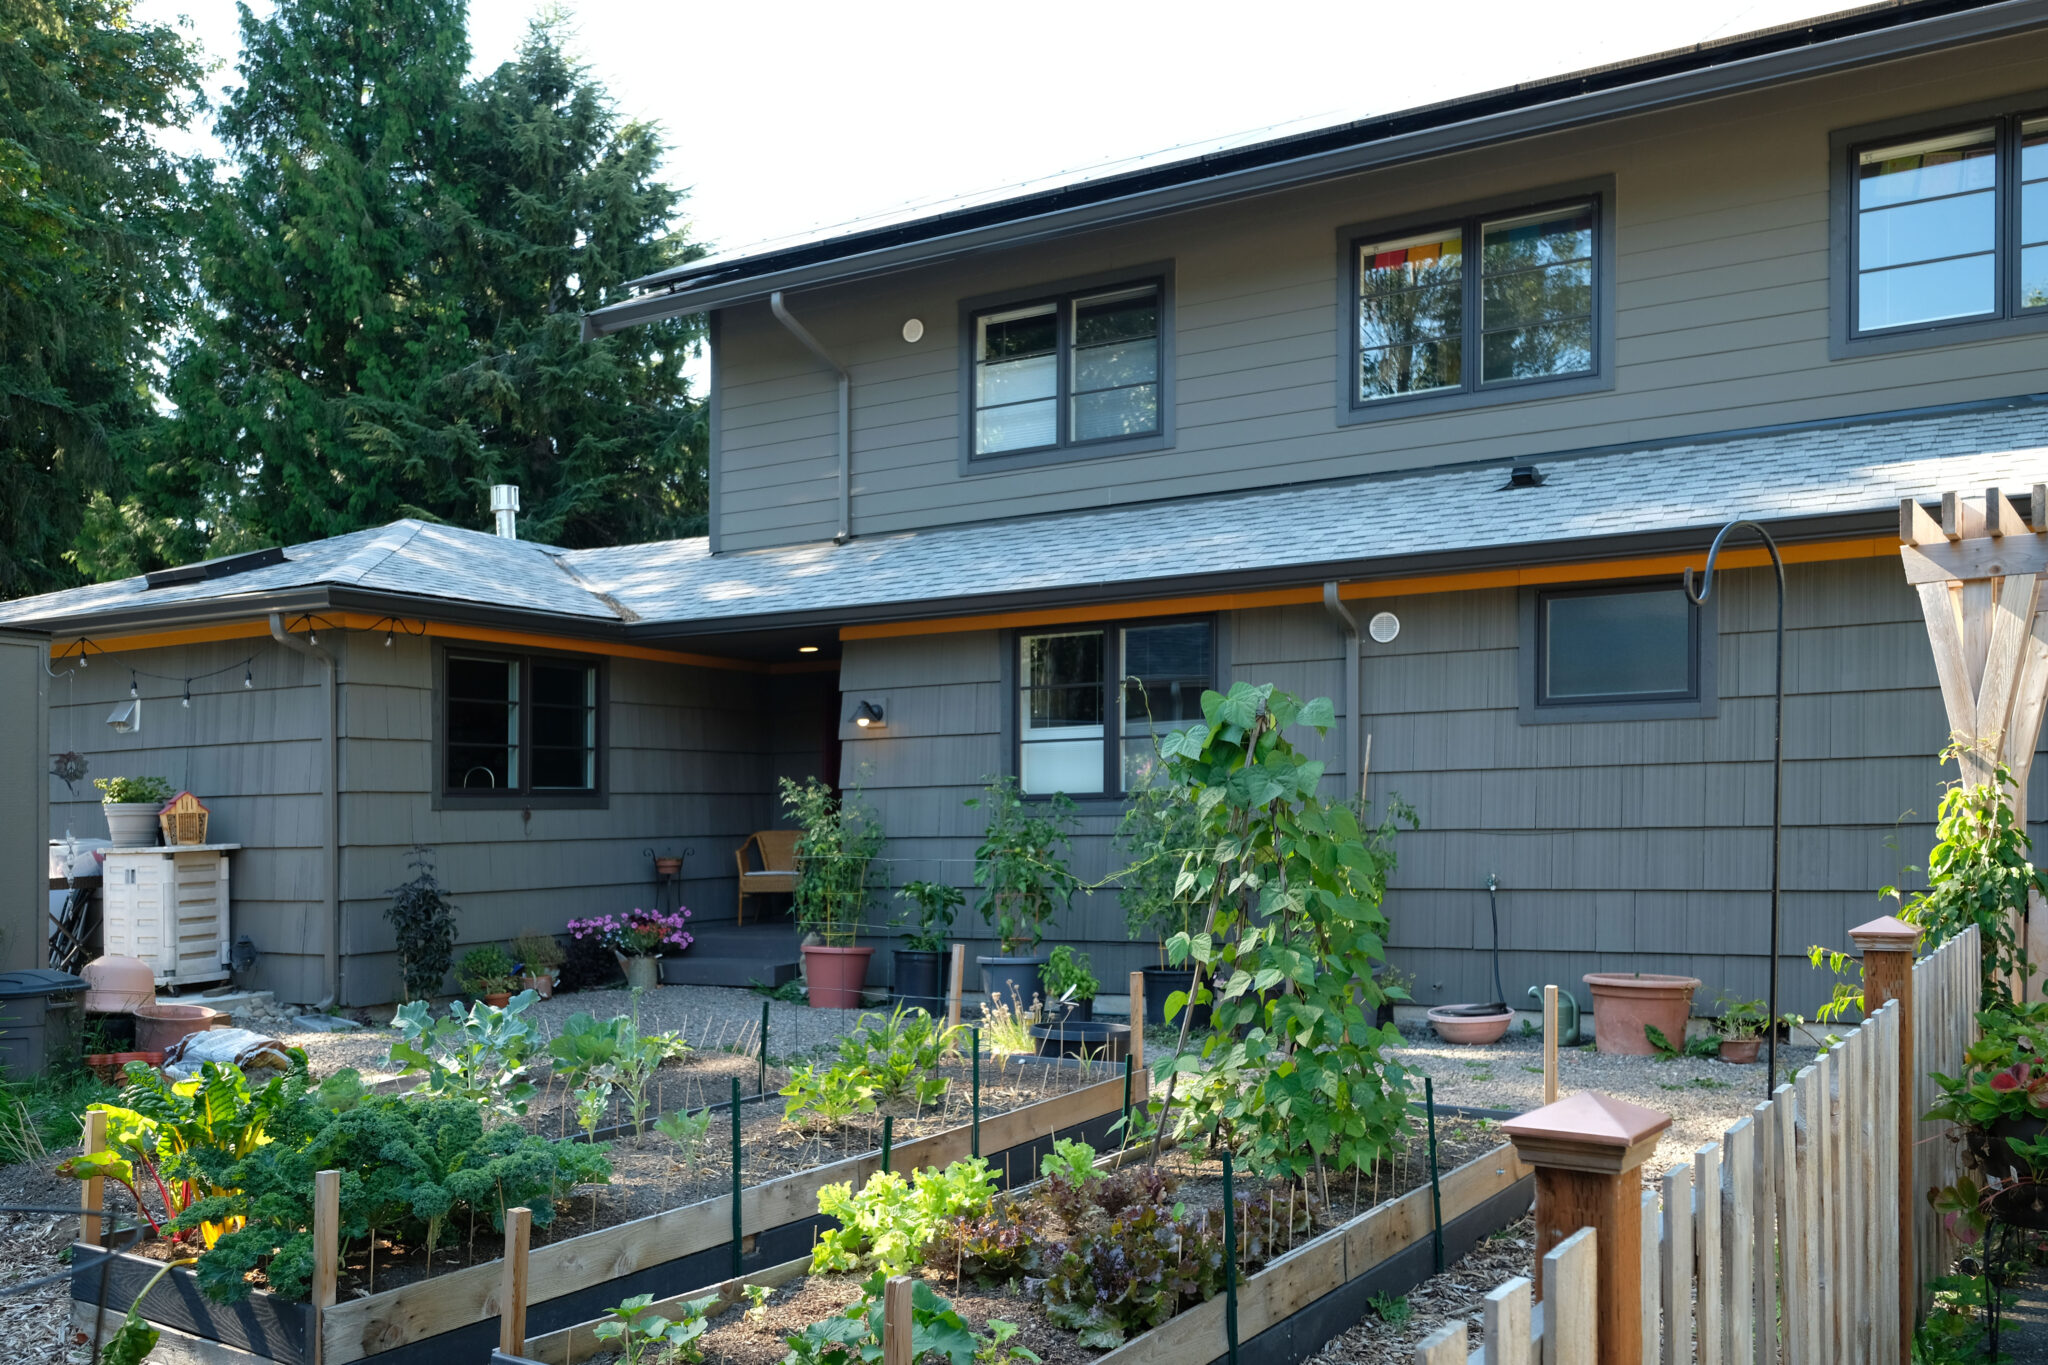 NW Green Home Tour A free selfguided tour of green homes